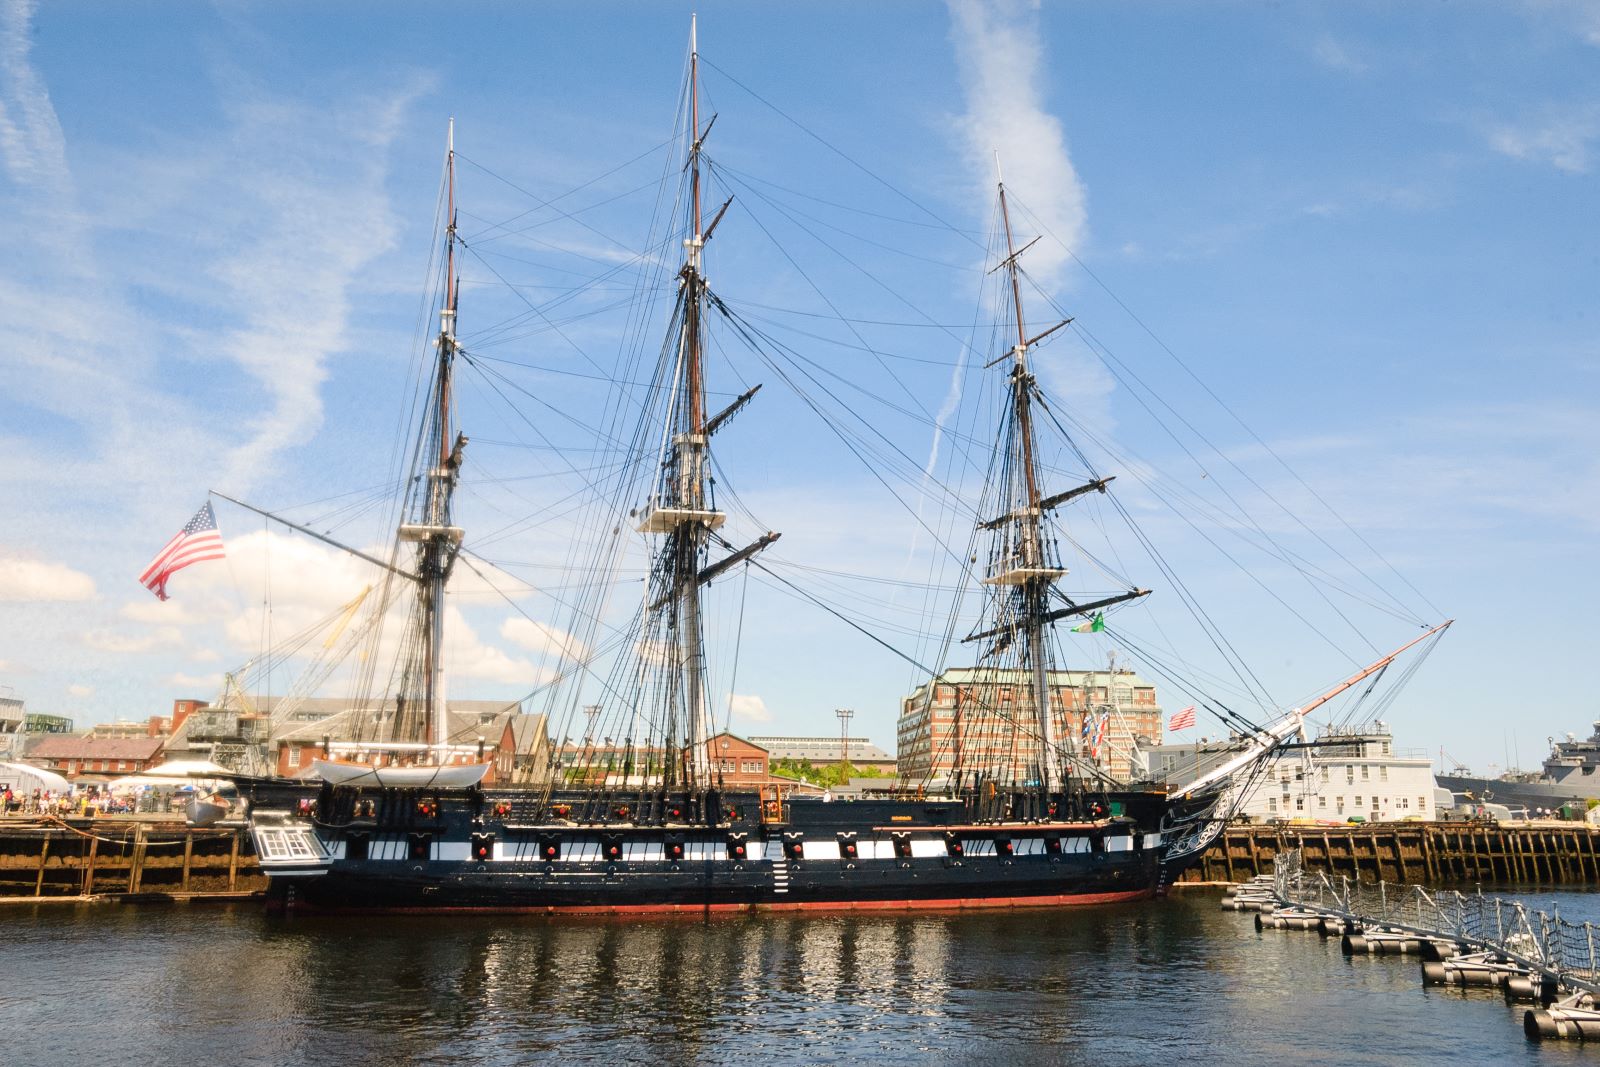 <p class="wp-caption-text">Image Credit: Shutterstock / Zack Frank</p>  <p>Explore the USS Constitution, the oldest commissioned warship afloat in the world. Known as “Old Ironsides,” it’s a remarkable glimpse into naval history.</p>